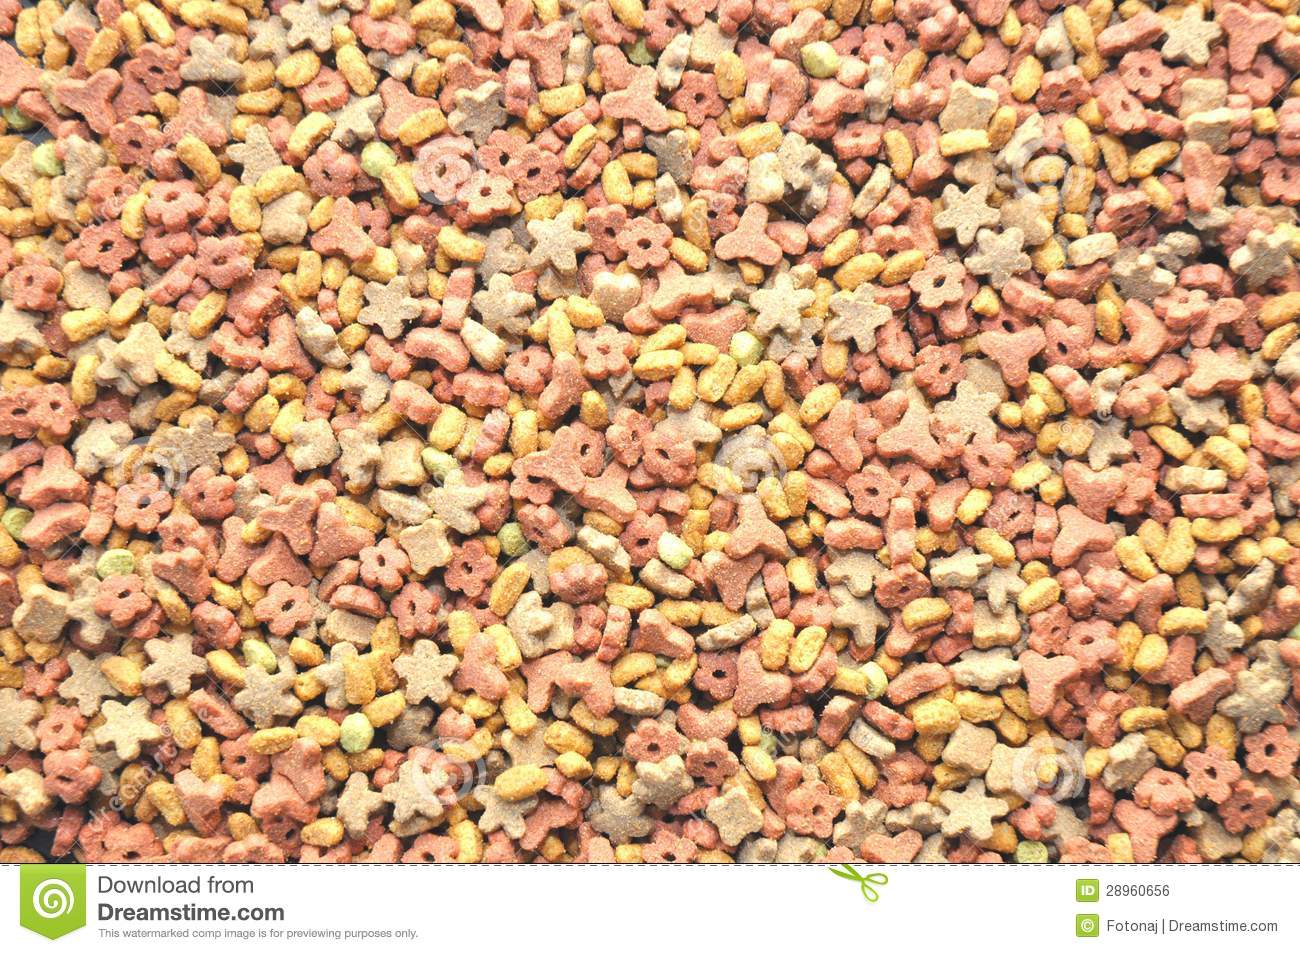 Dry Food For Dog Cat Royalty Free Stock Image   Image  28960656